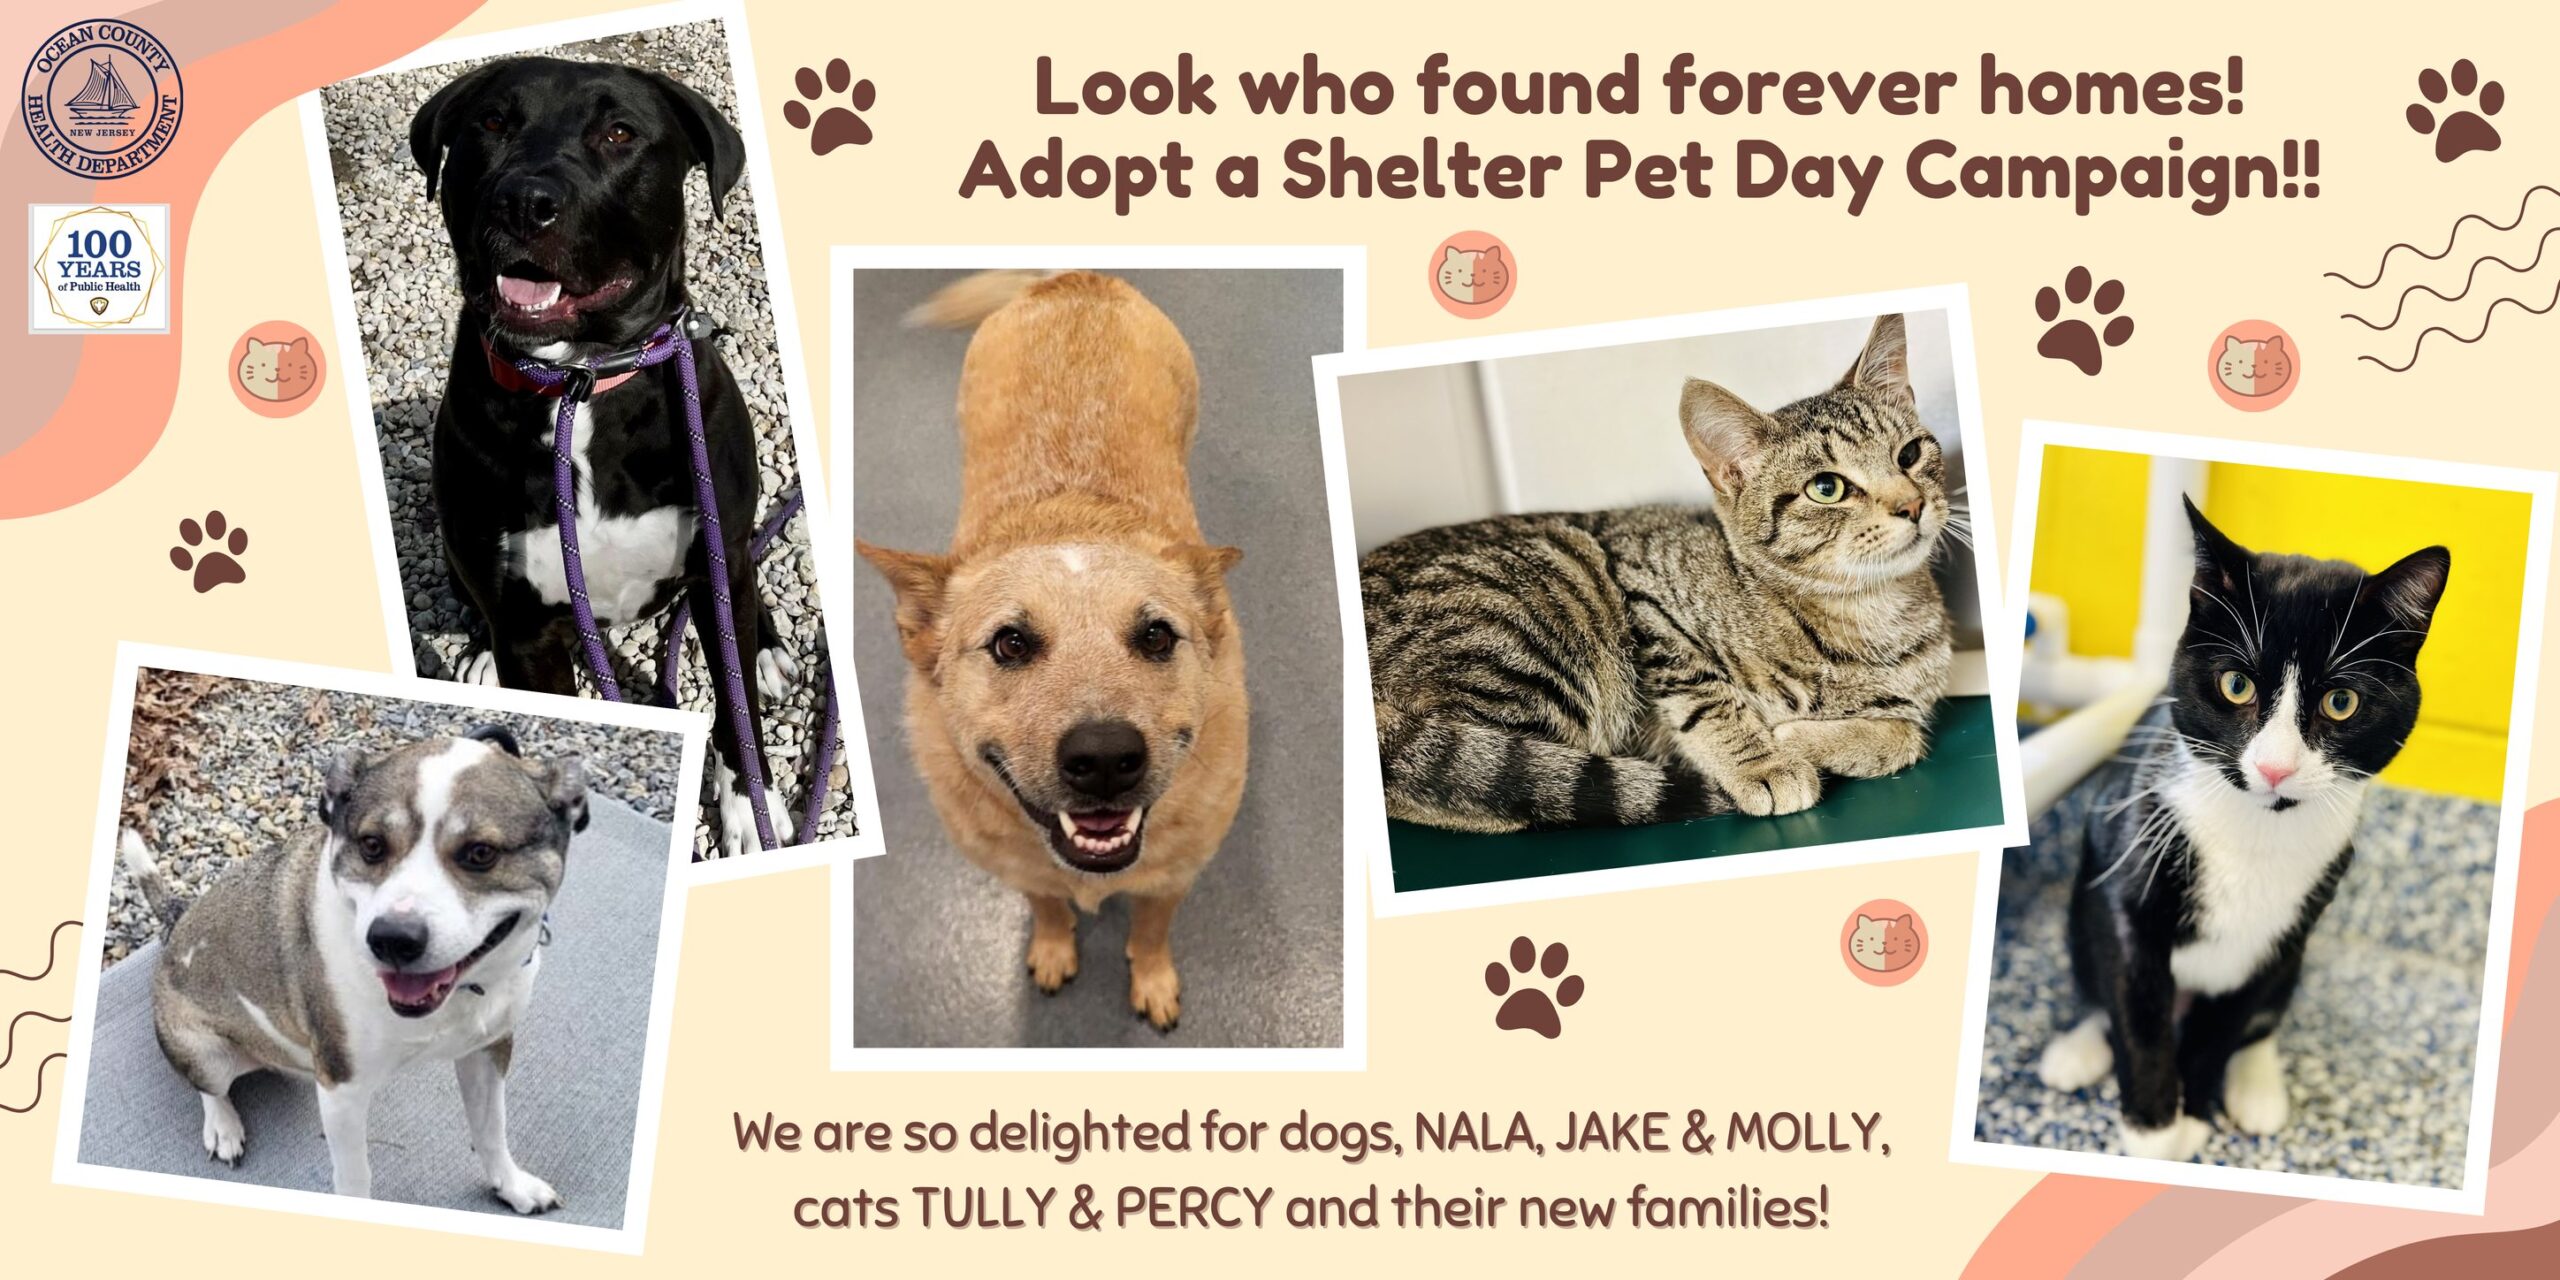 Adopt a shelter pet day